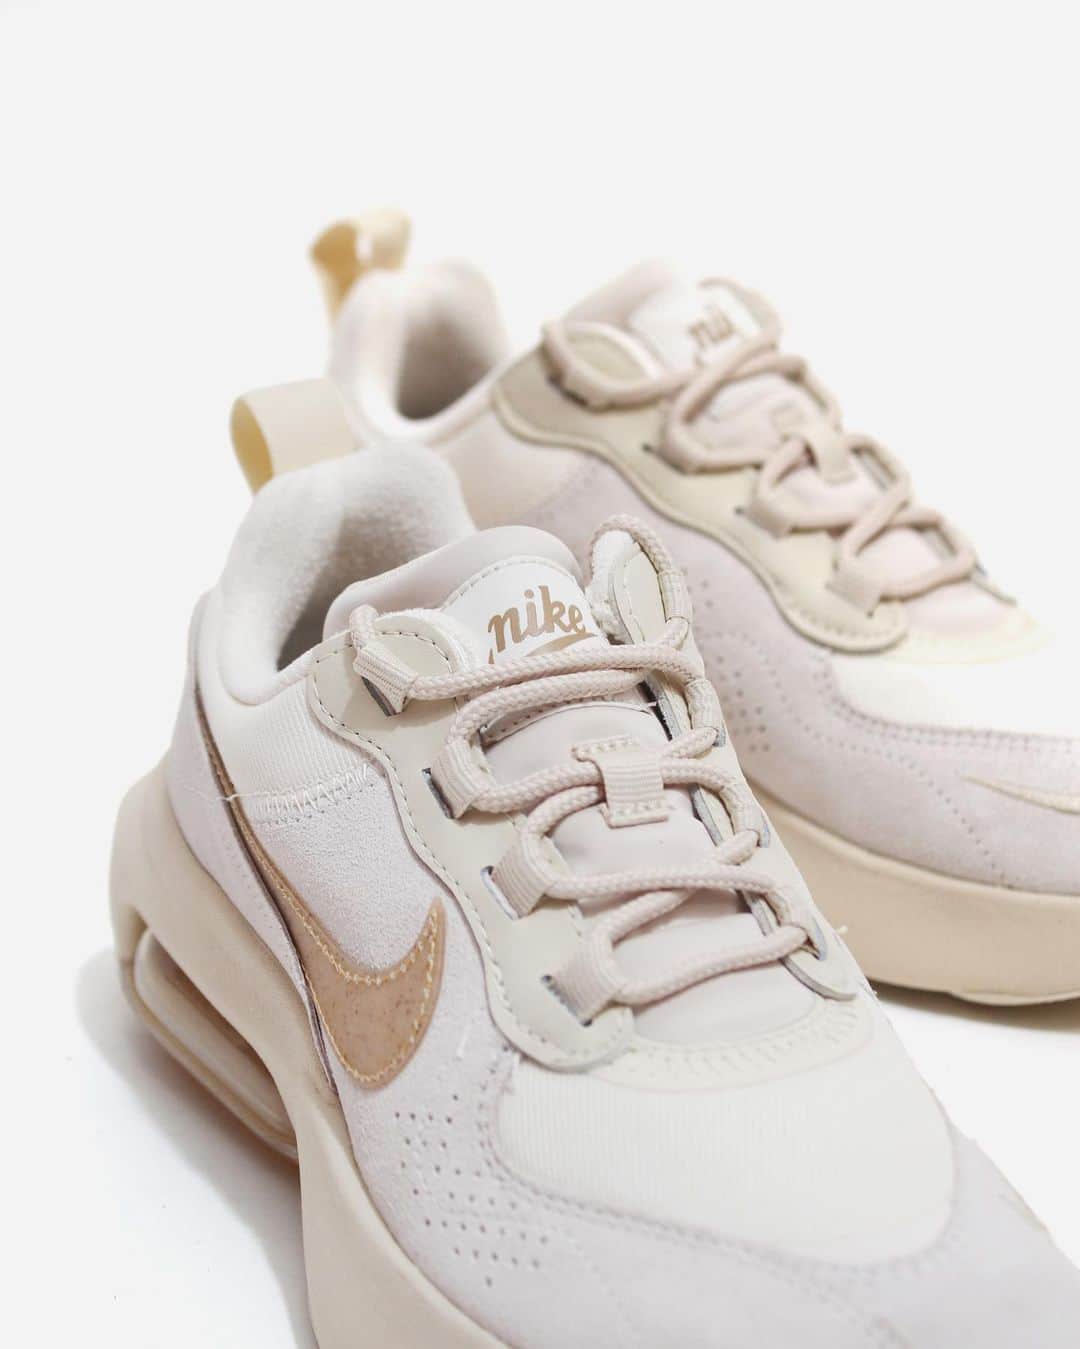 A+Sのインスタグラム：「2021. 2. 1 (mon) in store  ■NIKE WMNS AIR MAX VERONA COLOR : AUNA BROWN SIZE : 22.0cm - 25.0cm PRICE : ¥14,000 (+TAX)  カフェカルチャーののんびりとした雰囲気からインスピレーションを得て作られたカフェラテパック。豊かで温かみのあるラテがカラーベースになります。これまでリリースされたビビットなカラーも良いです淡く優しい雰囲気のあるカラーは日常に安らぎを与えてくれます。  A cafe latte pack inspired by the laid-back atmosphere of cafe culture. The rich and warm latte is the color base. The vivid colors released so far are also good. Colors with a light and gentle atmosphere give you peace of mind in your daily life.  #a_and_s #NIKE #NIKEAIRMAX #NIKEAIRMAXVERONA #NIKECAFFELATTEPACK」